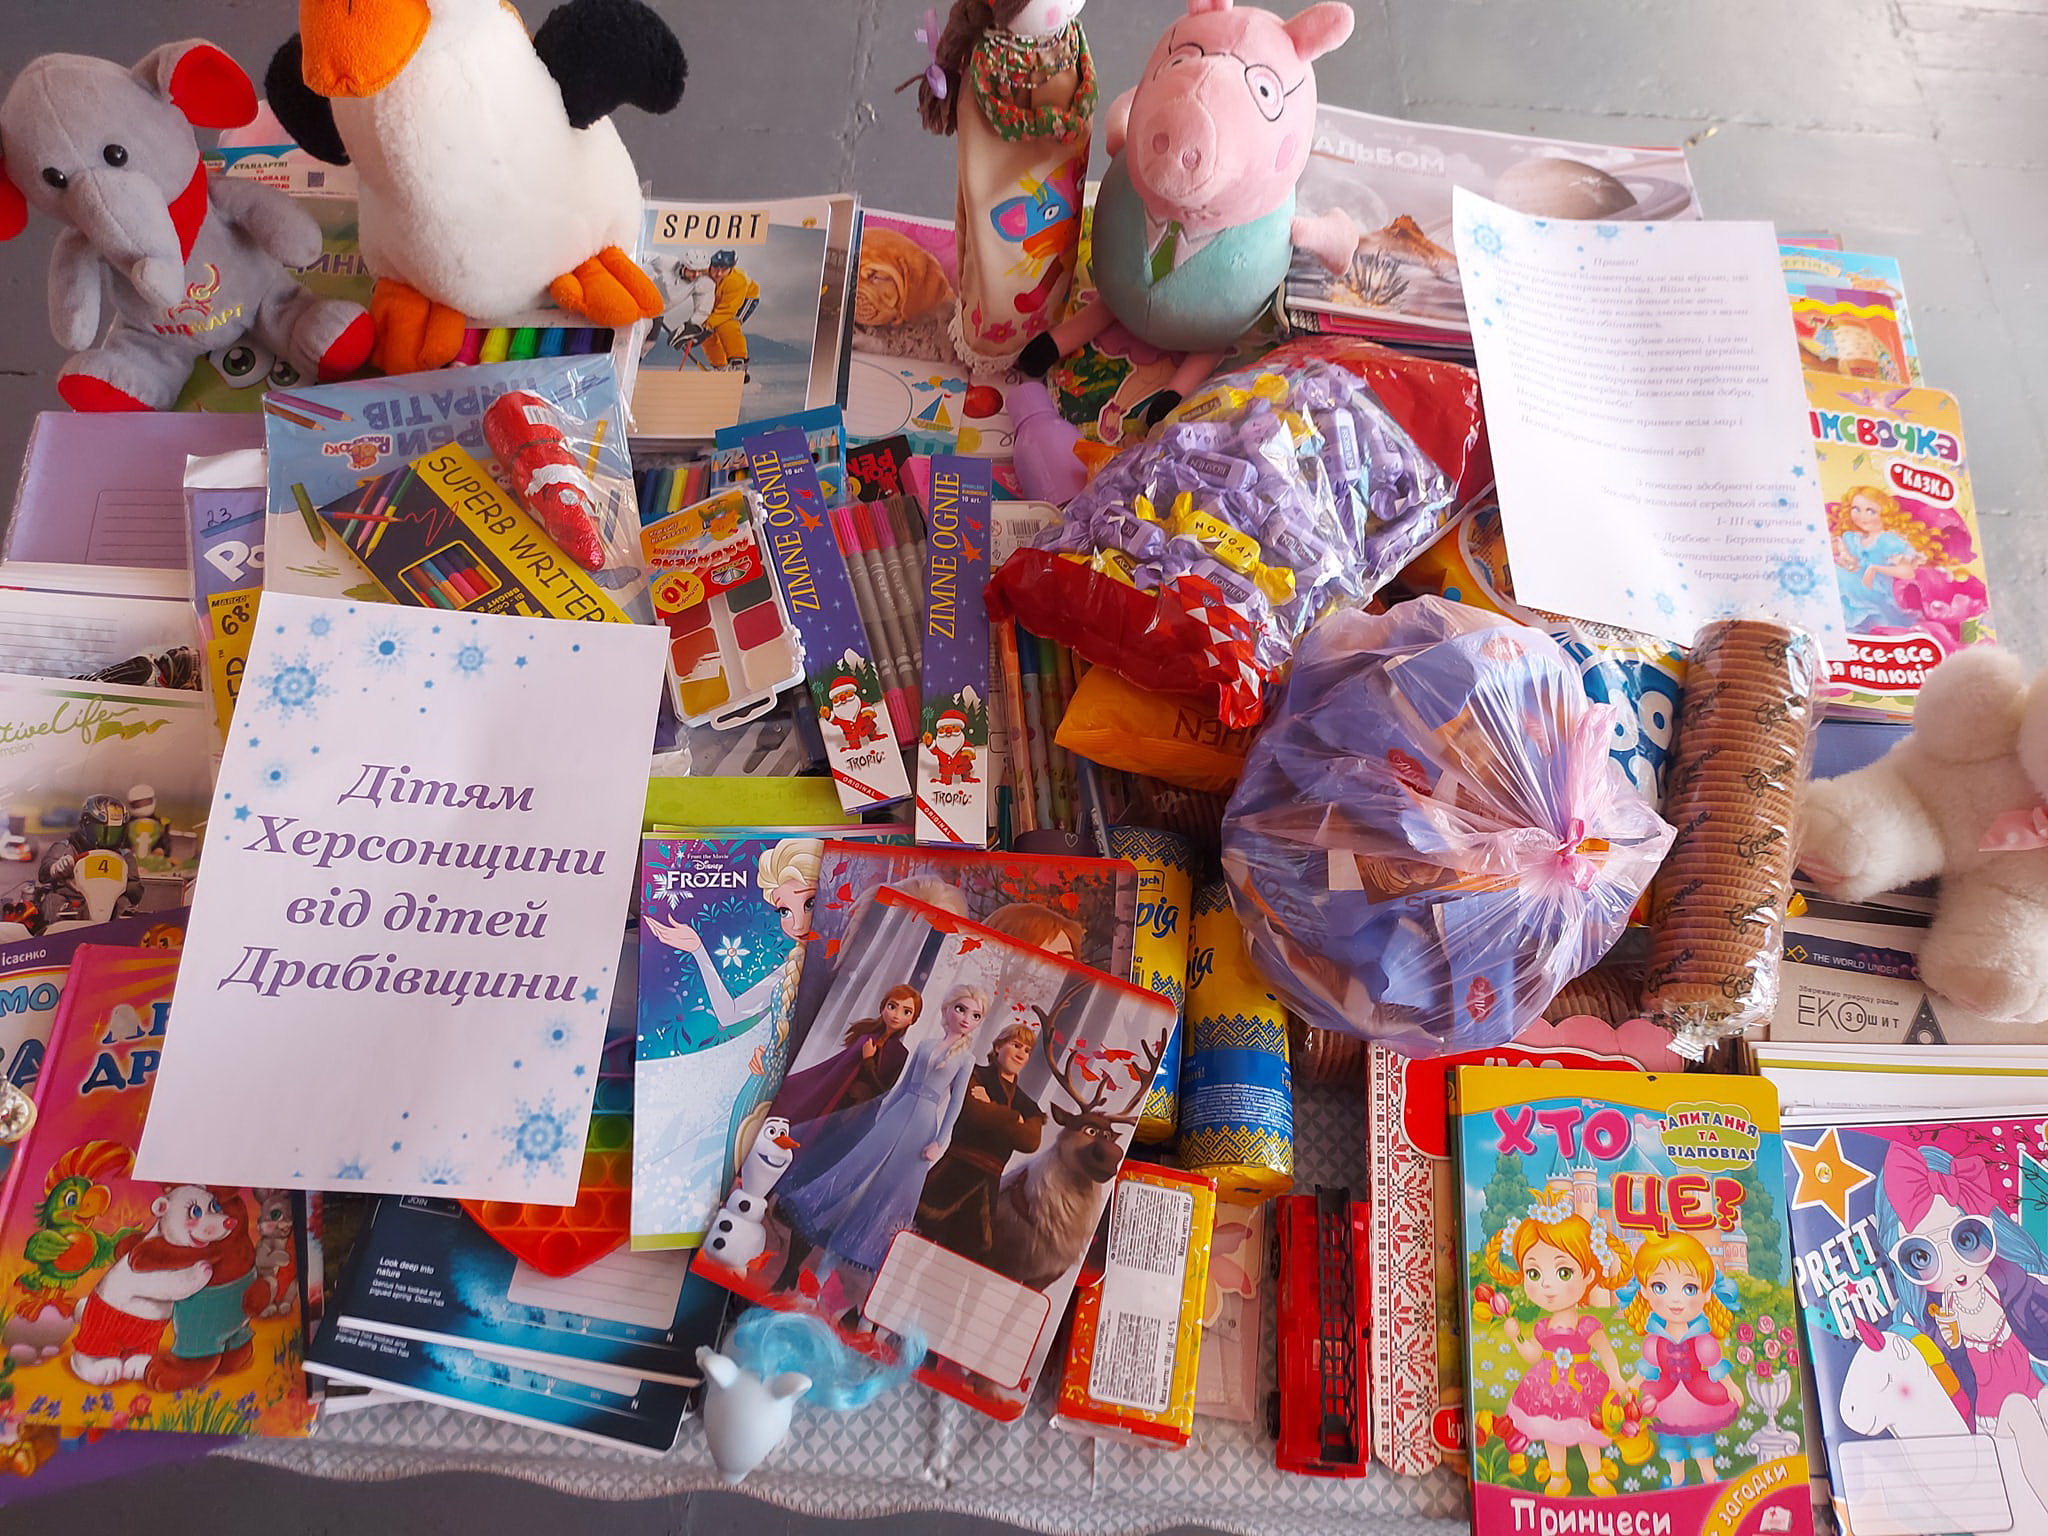 Gifts for the Children of Kherson Region for St. Nicholas Day